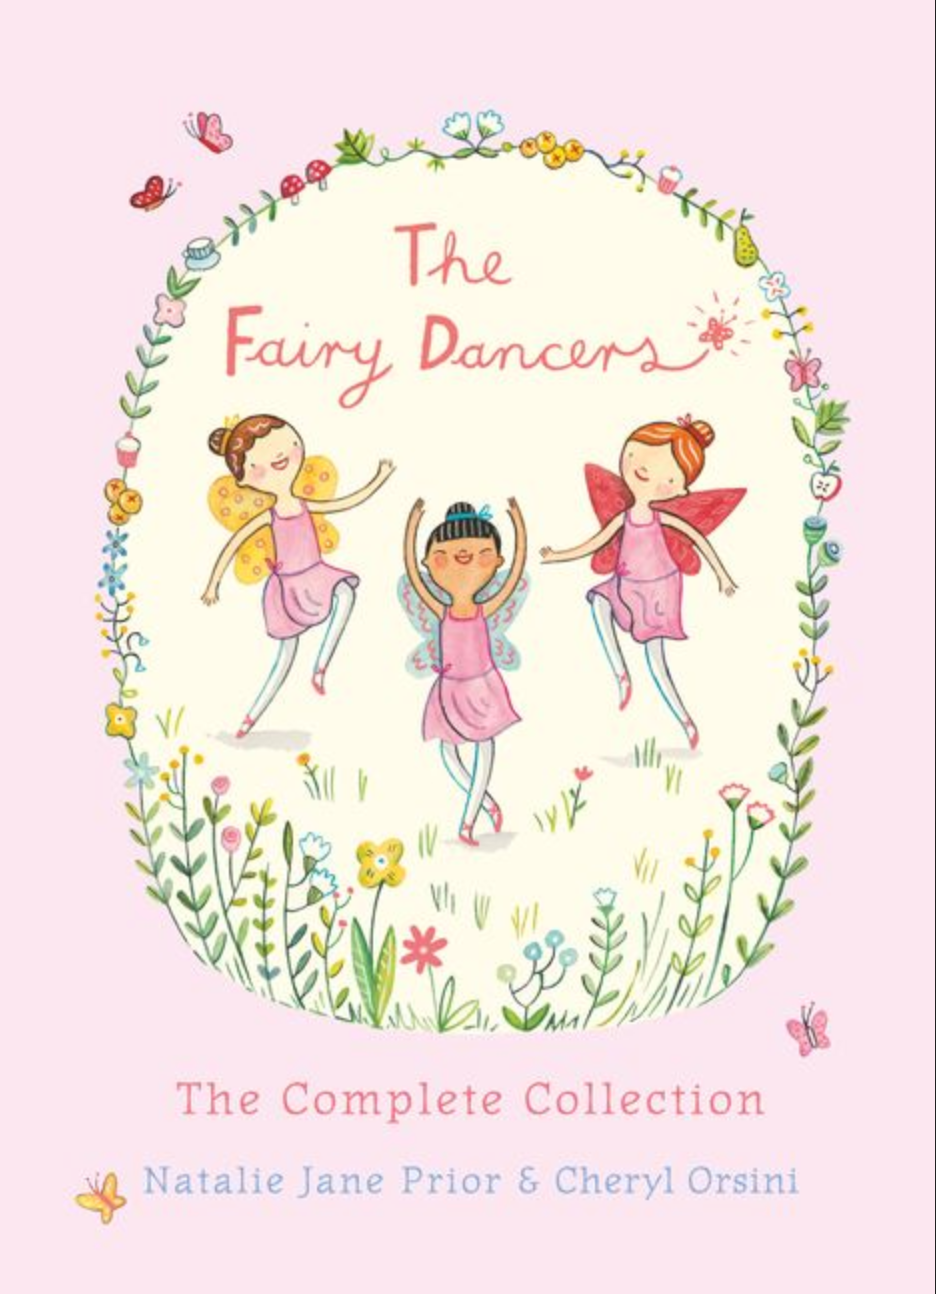 The Fairy Dancers Complete Collection - Natalie Jane Prior - H/B